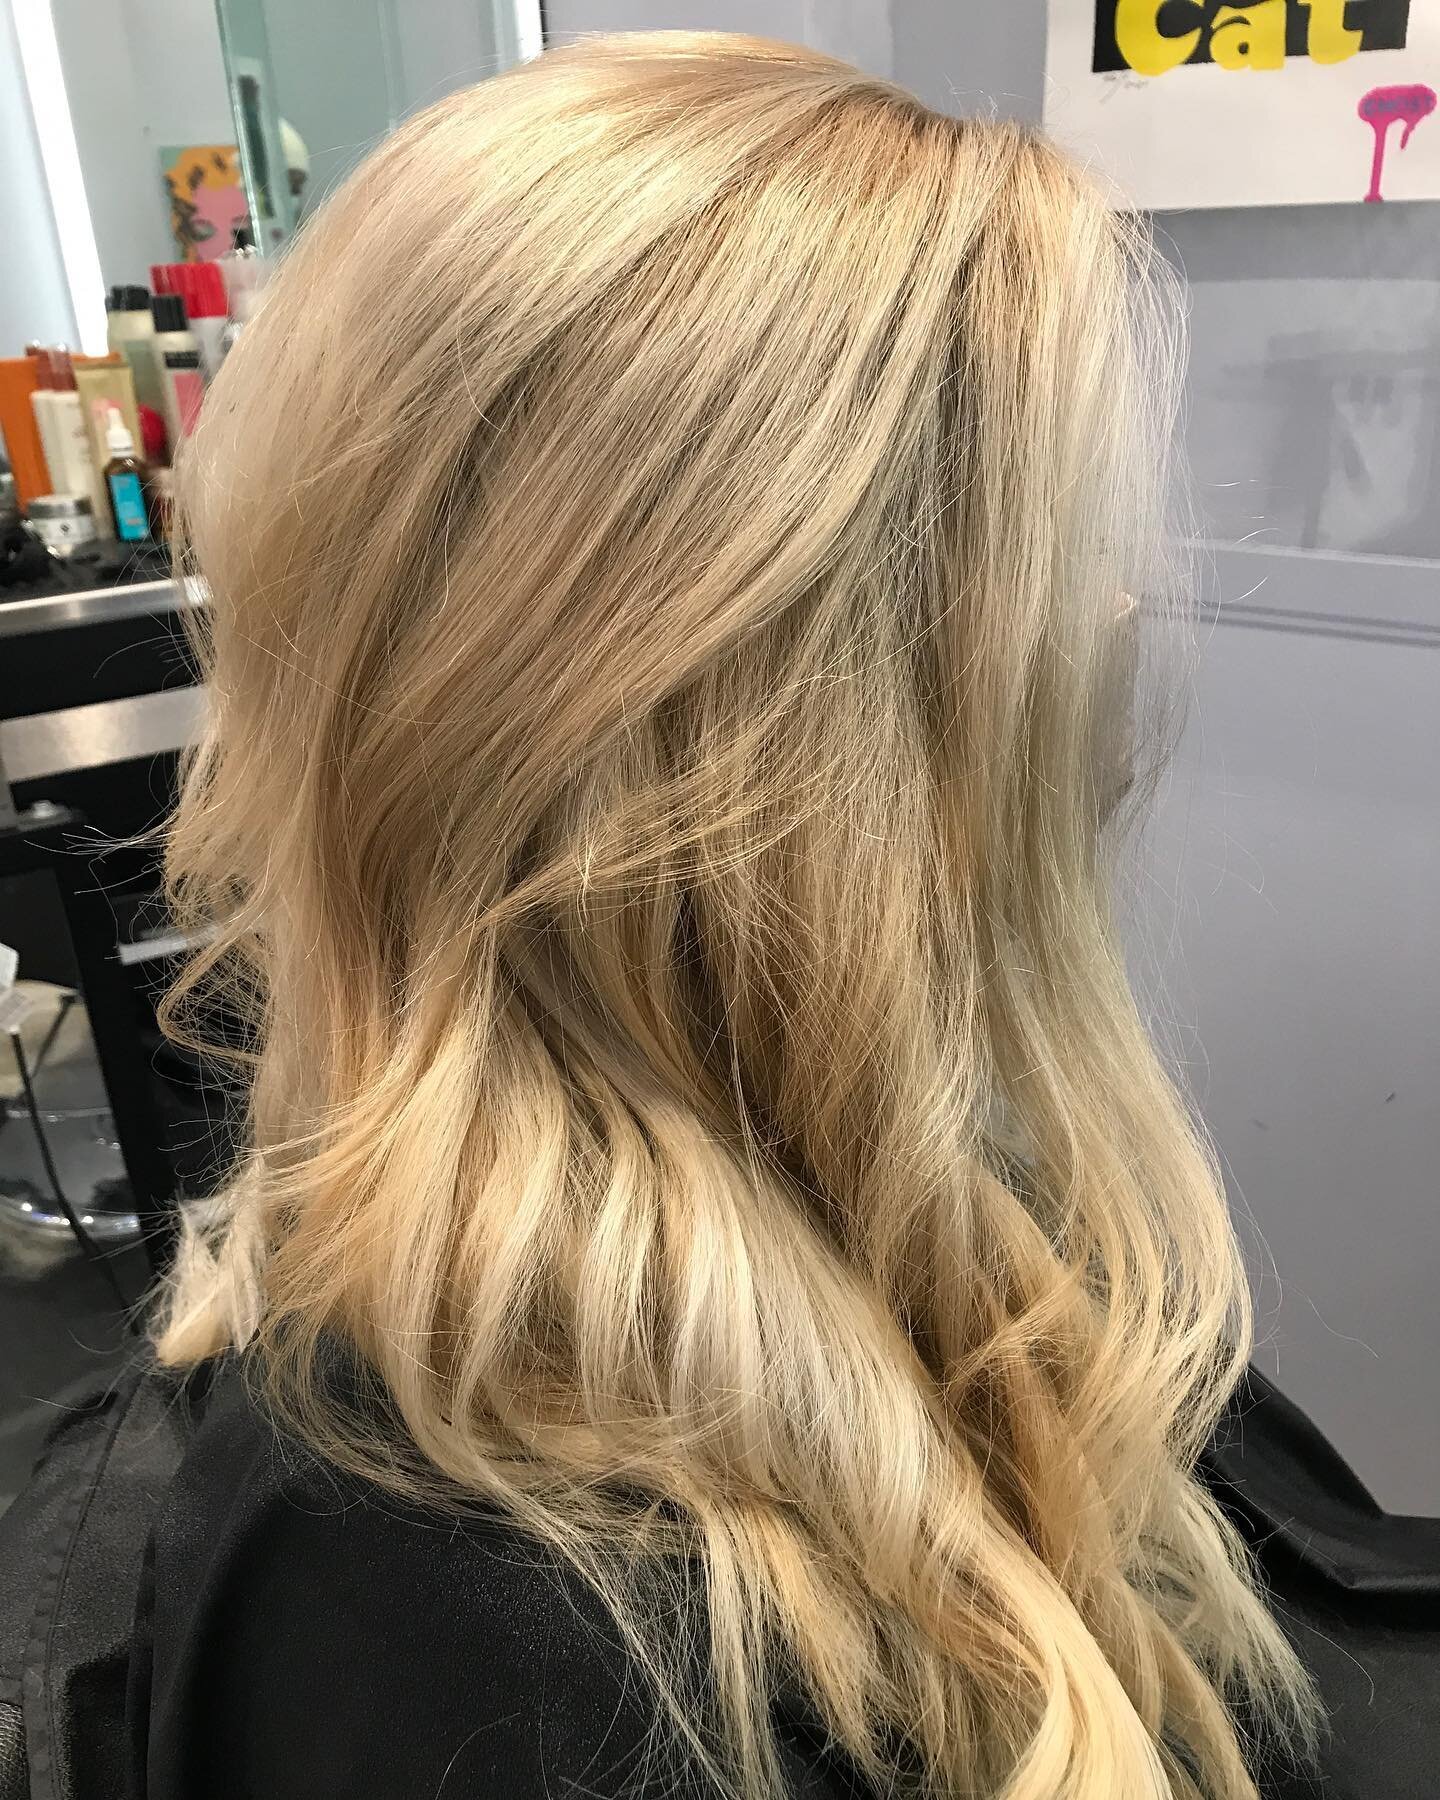 Created this blonde using only a free hand balayage technique. Thank you for trusting me with your first color experience! 
Swipe to third photo for what we started with

#donziebeldenhair @bauhaussalonslc #slchairstylist #slcbalayagespecialist